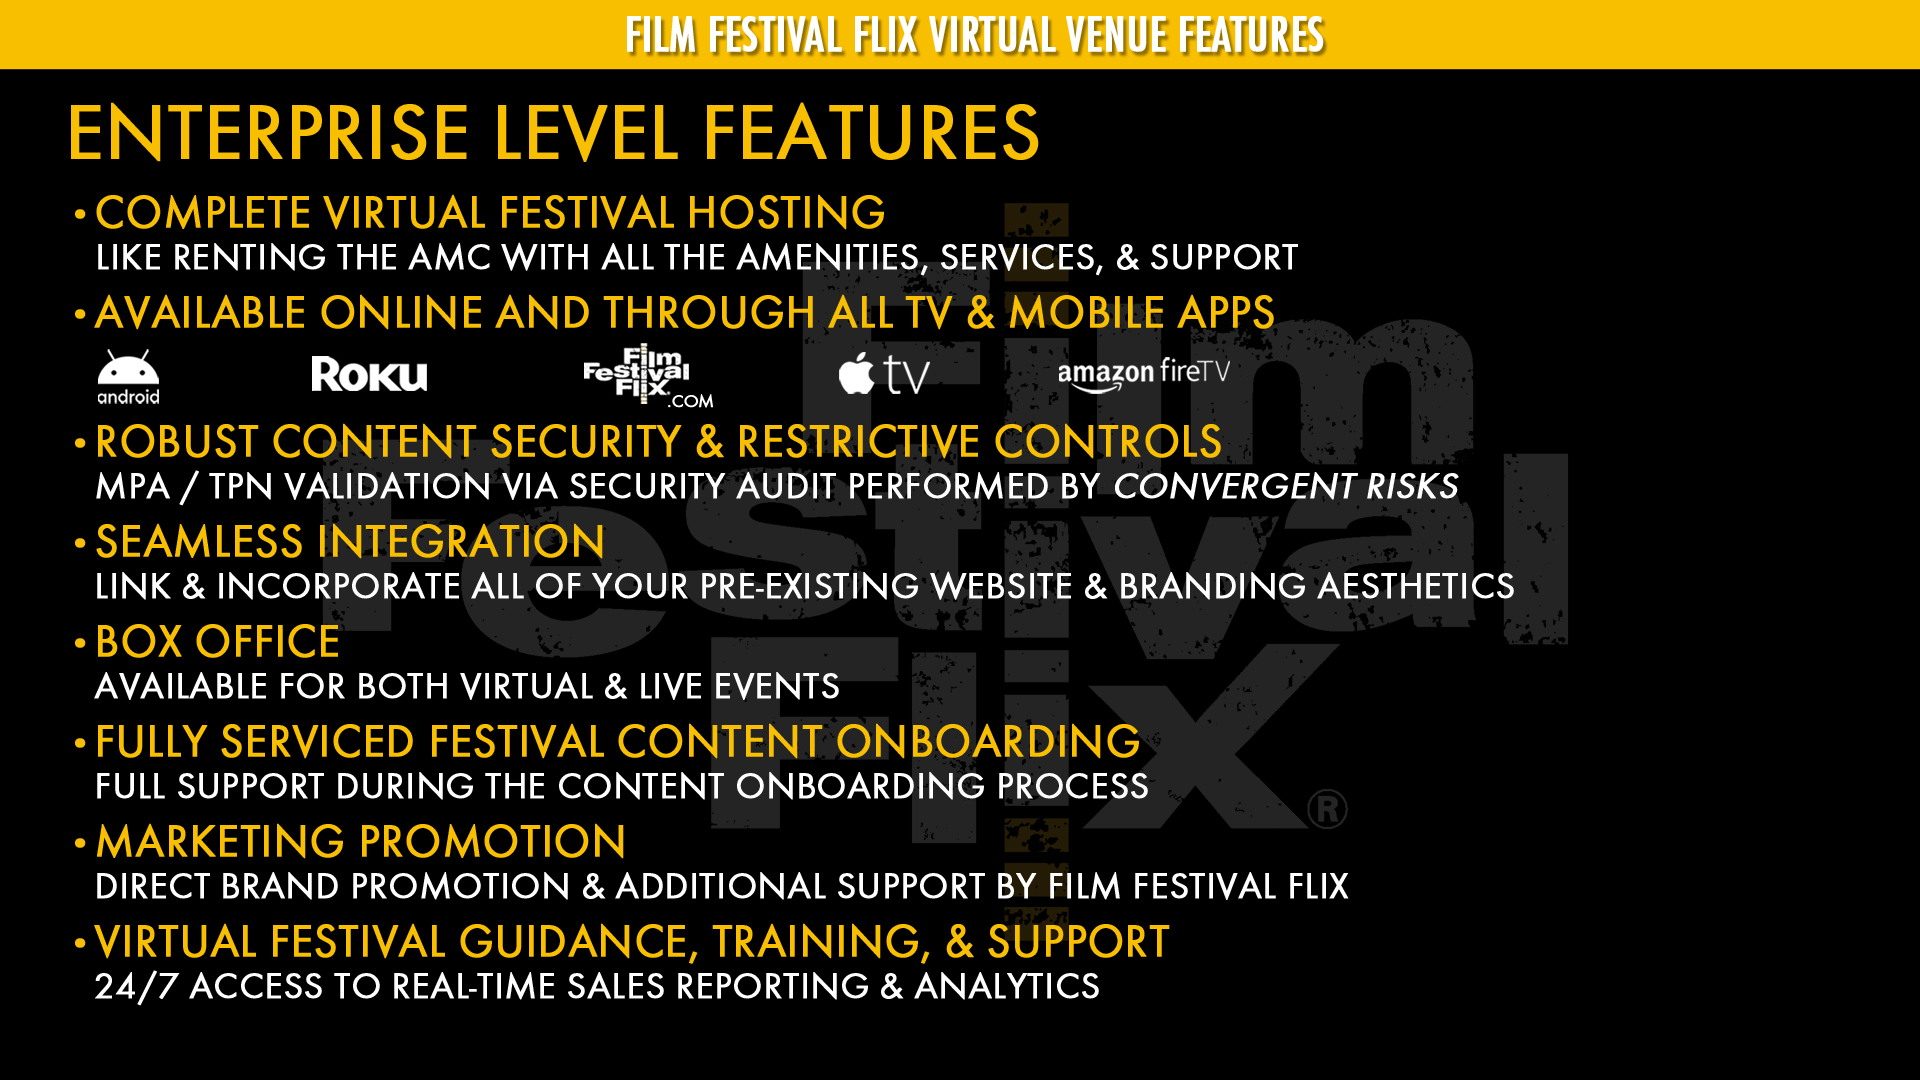 Film Festival Flix Pricing Page 2